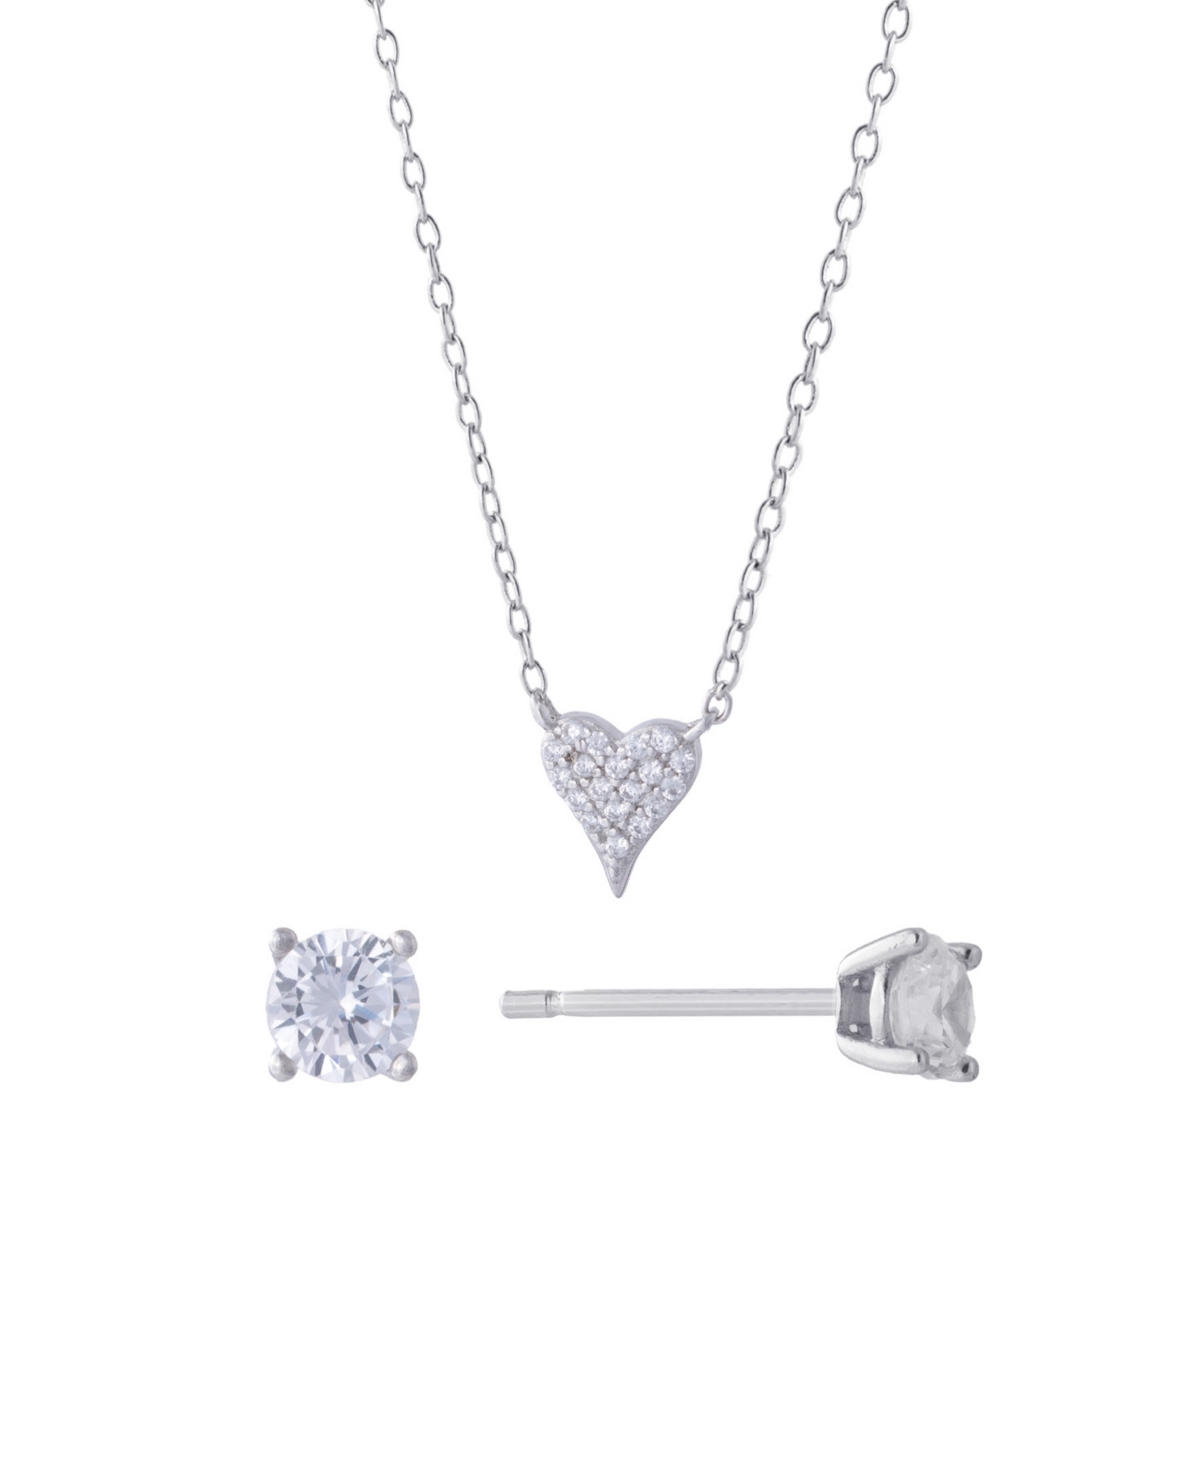 Giani Bernini Gianni Bernini 2-piece Cubic Zirconia Pave Heart Stud Necklace Set (1.09 Ct. T.w.) In Sterling Silve In Sterling Silver